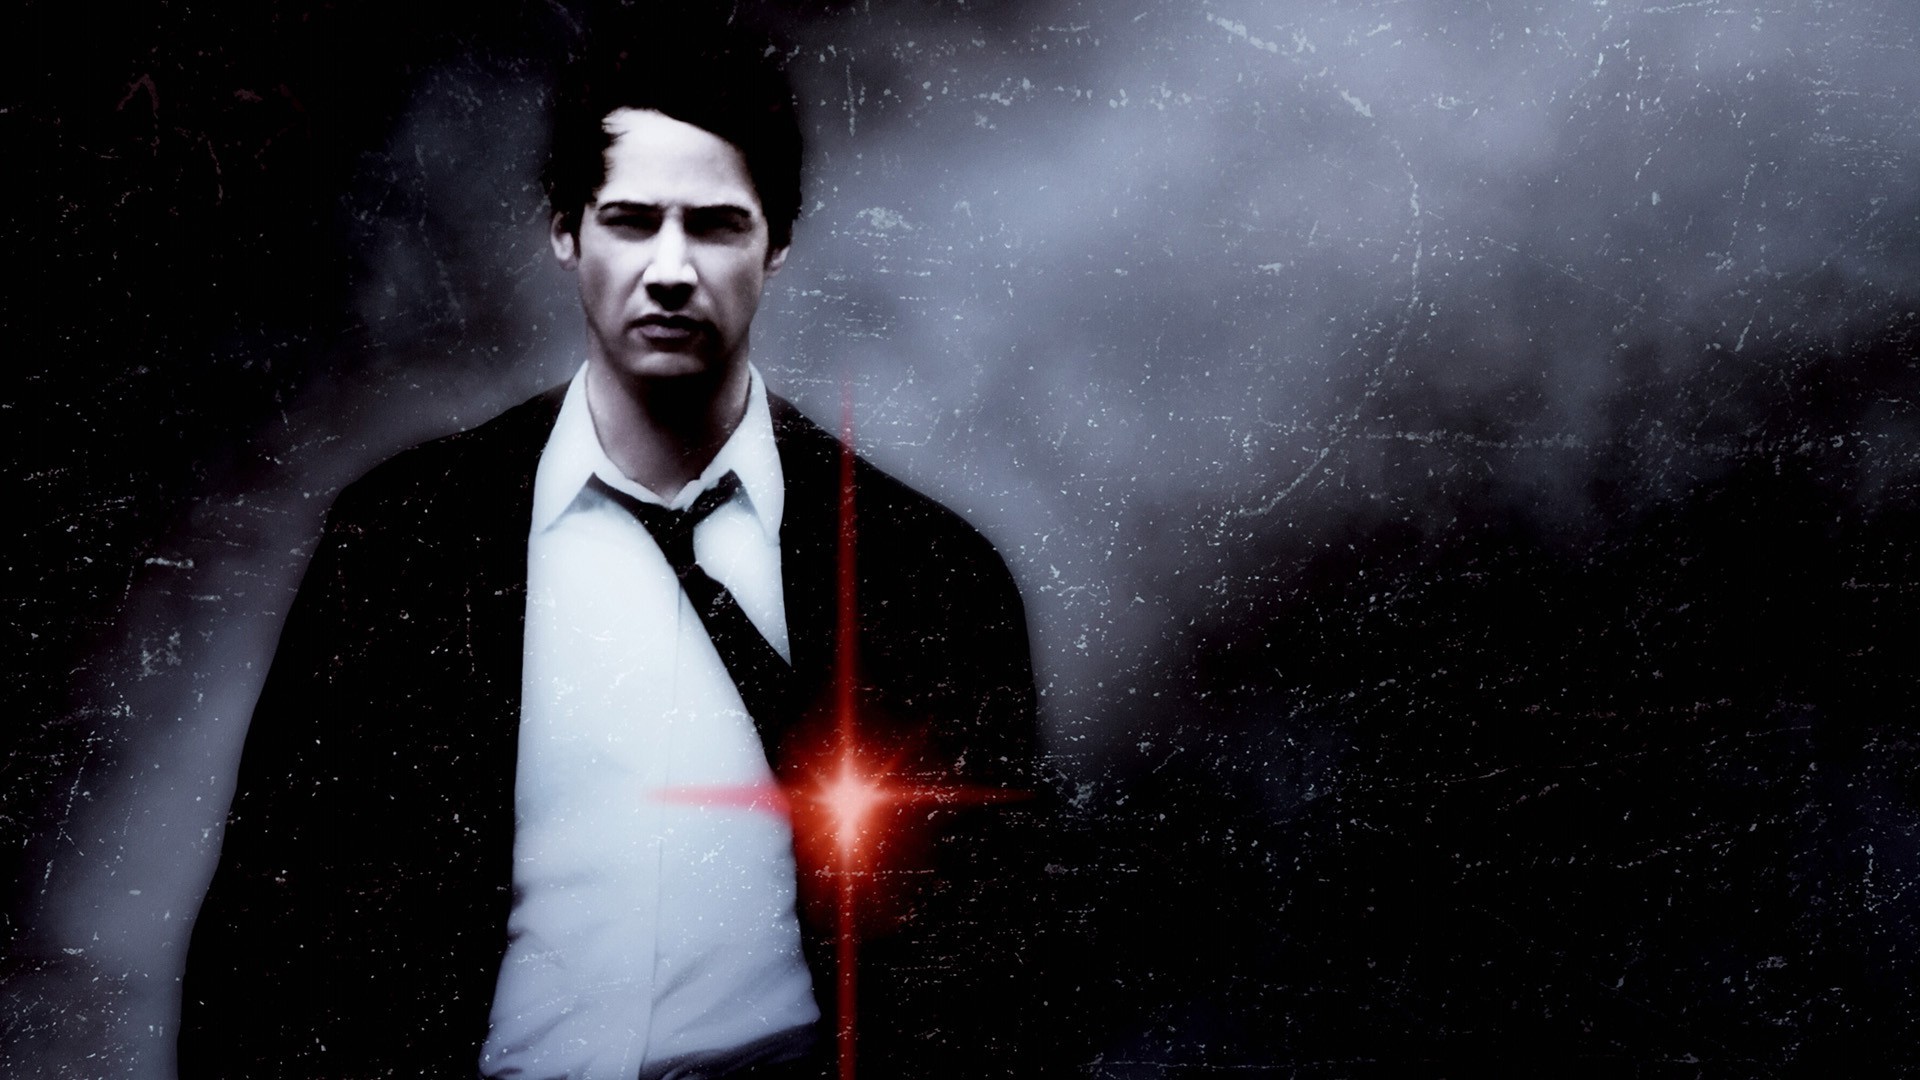 movies-keanu-reeves-constantine-wallpapers-hd-desktop-and-mobile-backgrounds